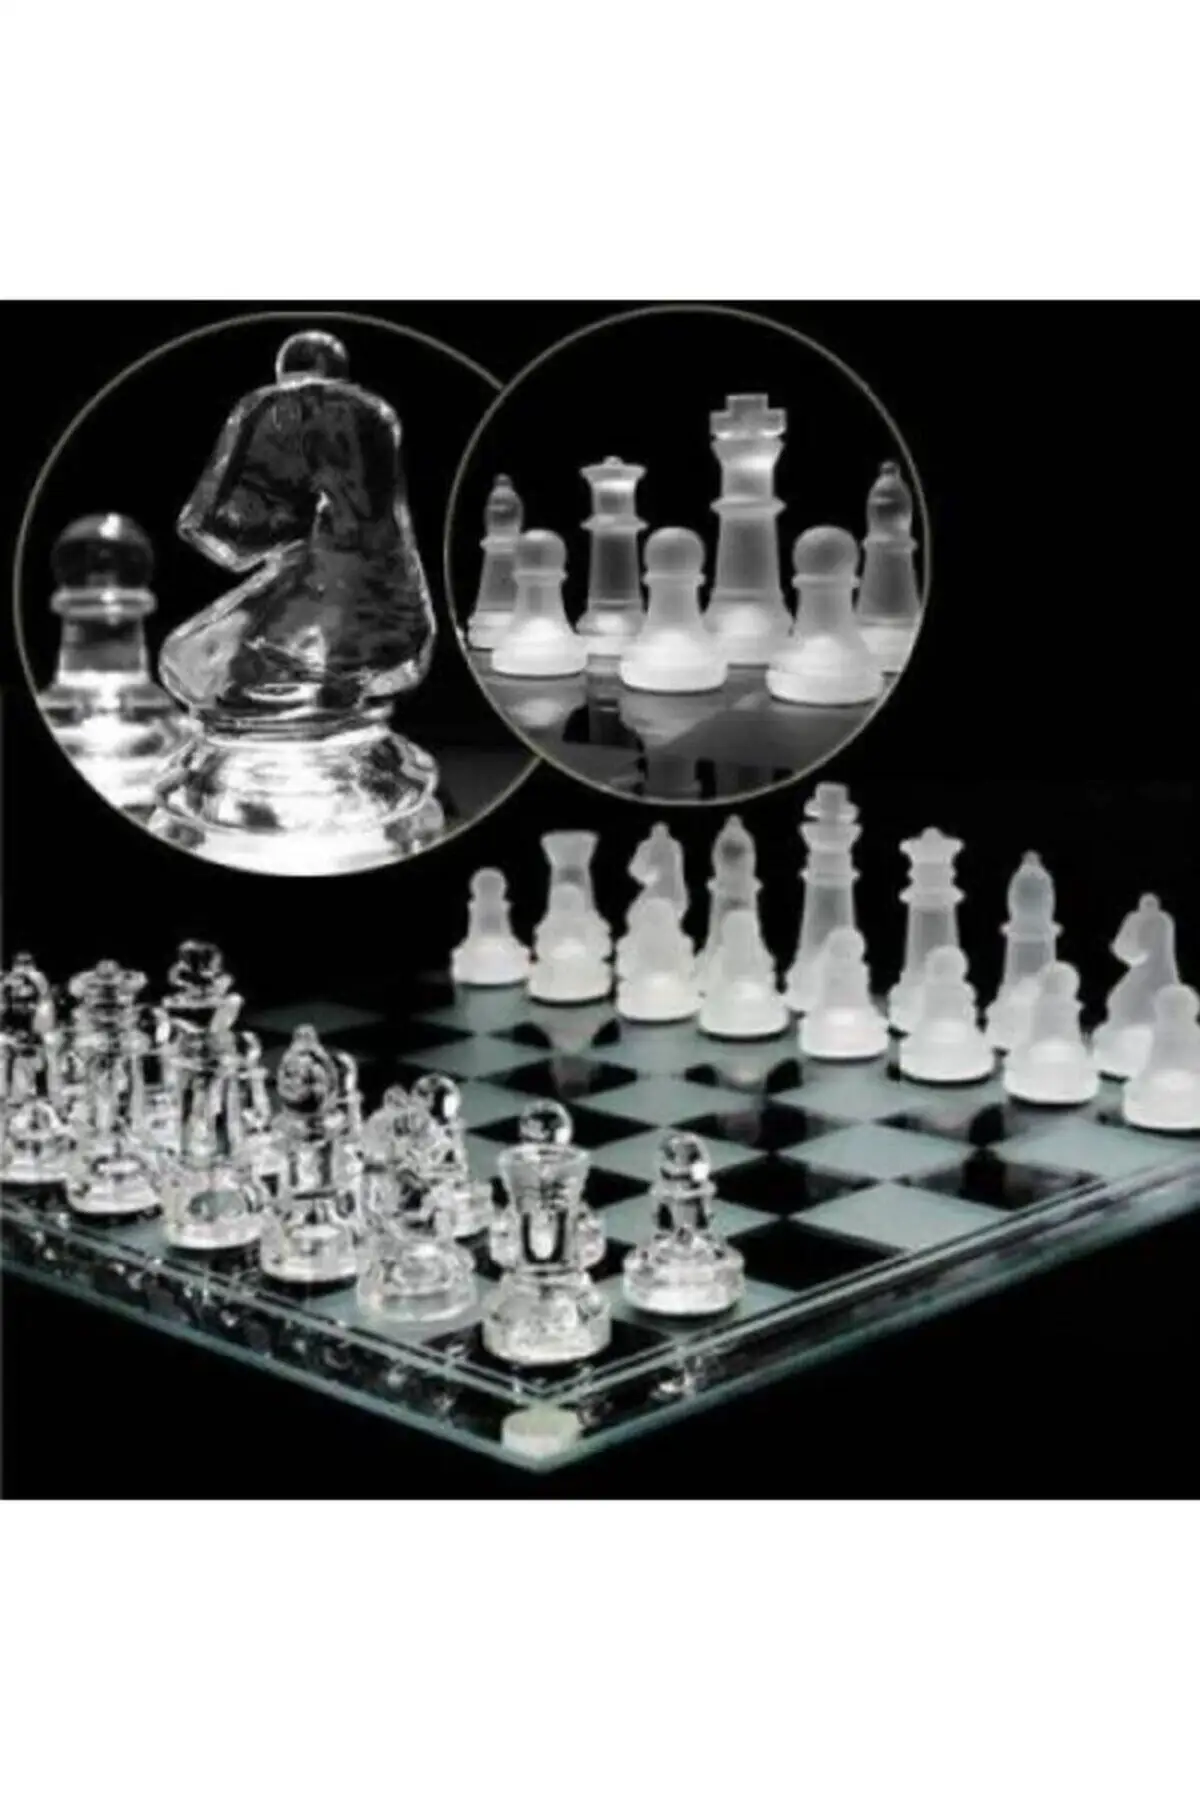 pine chess quality solid material custom craftsmanship stylish design attractive charming competition for champions